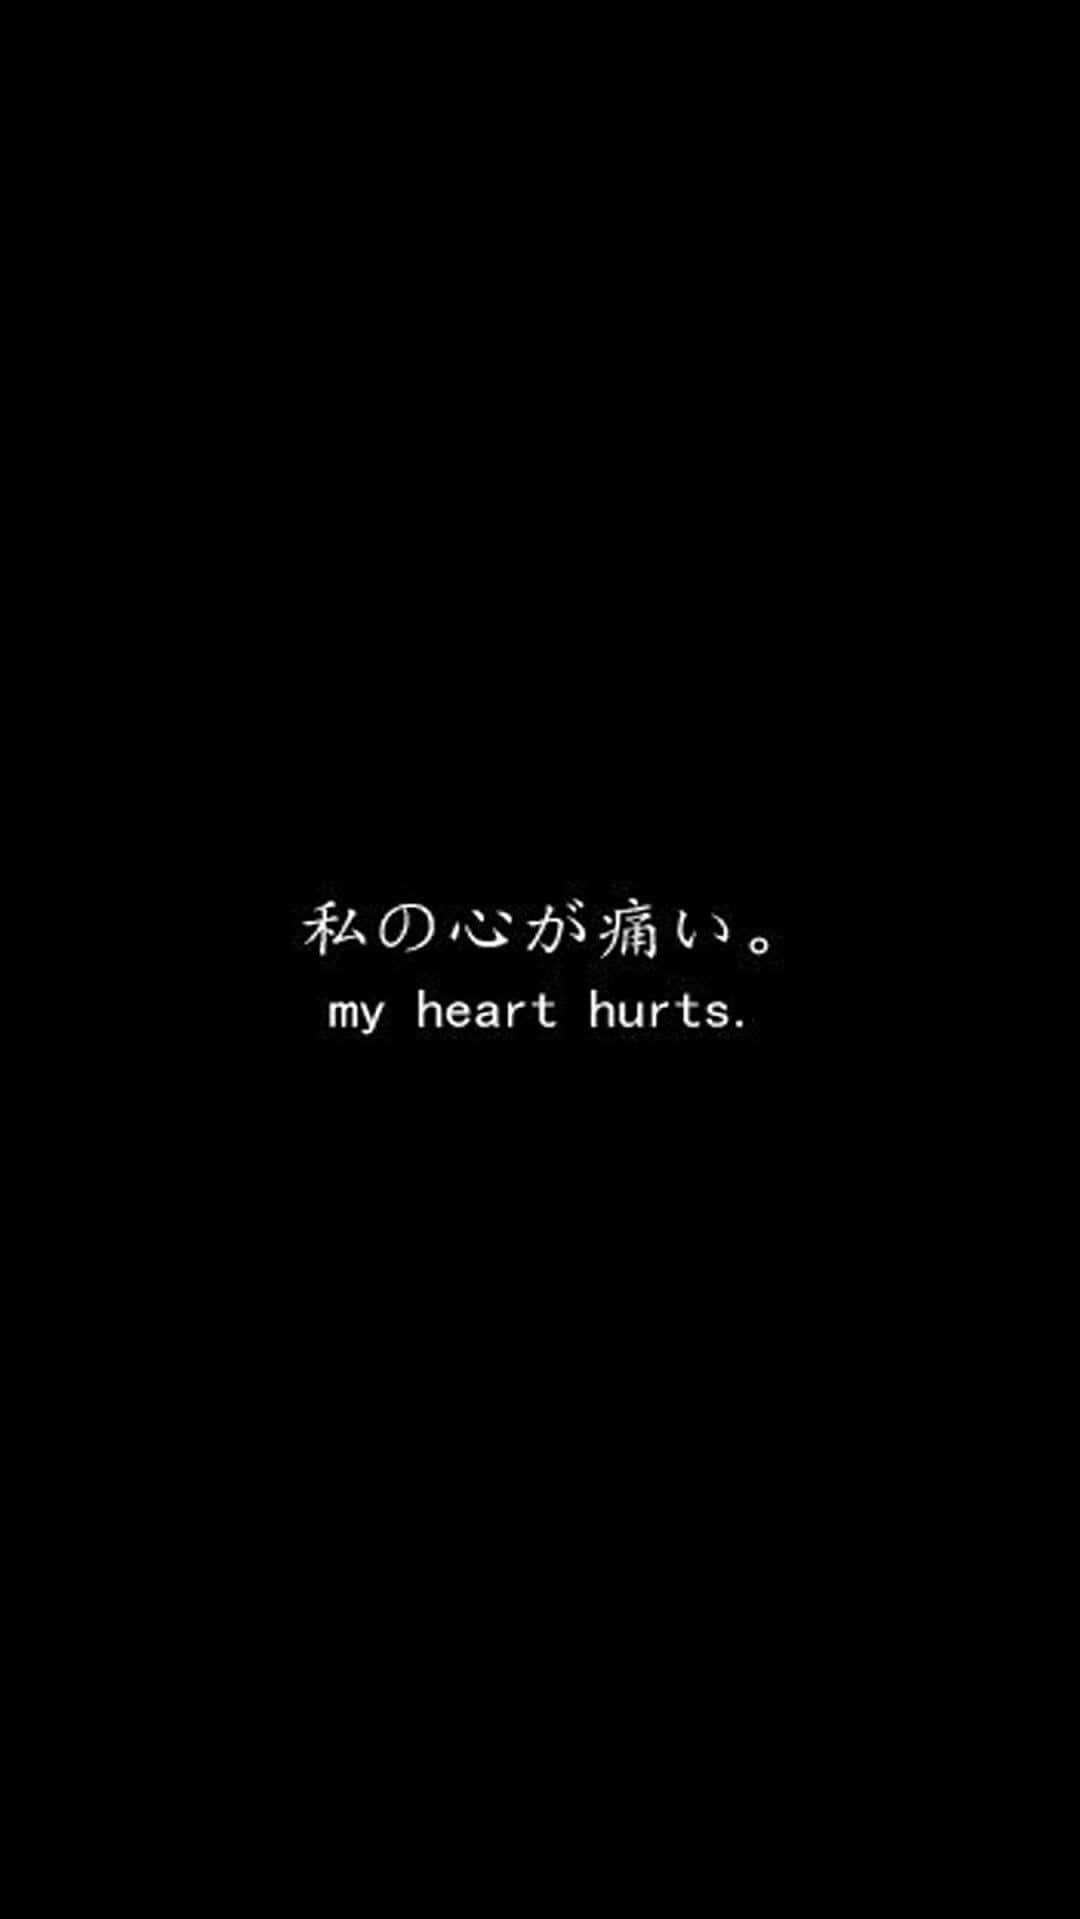 Download My Heart Hurts Japanese Aesthetic Black Wallpaper